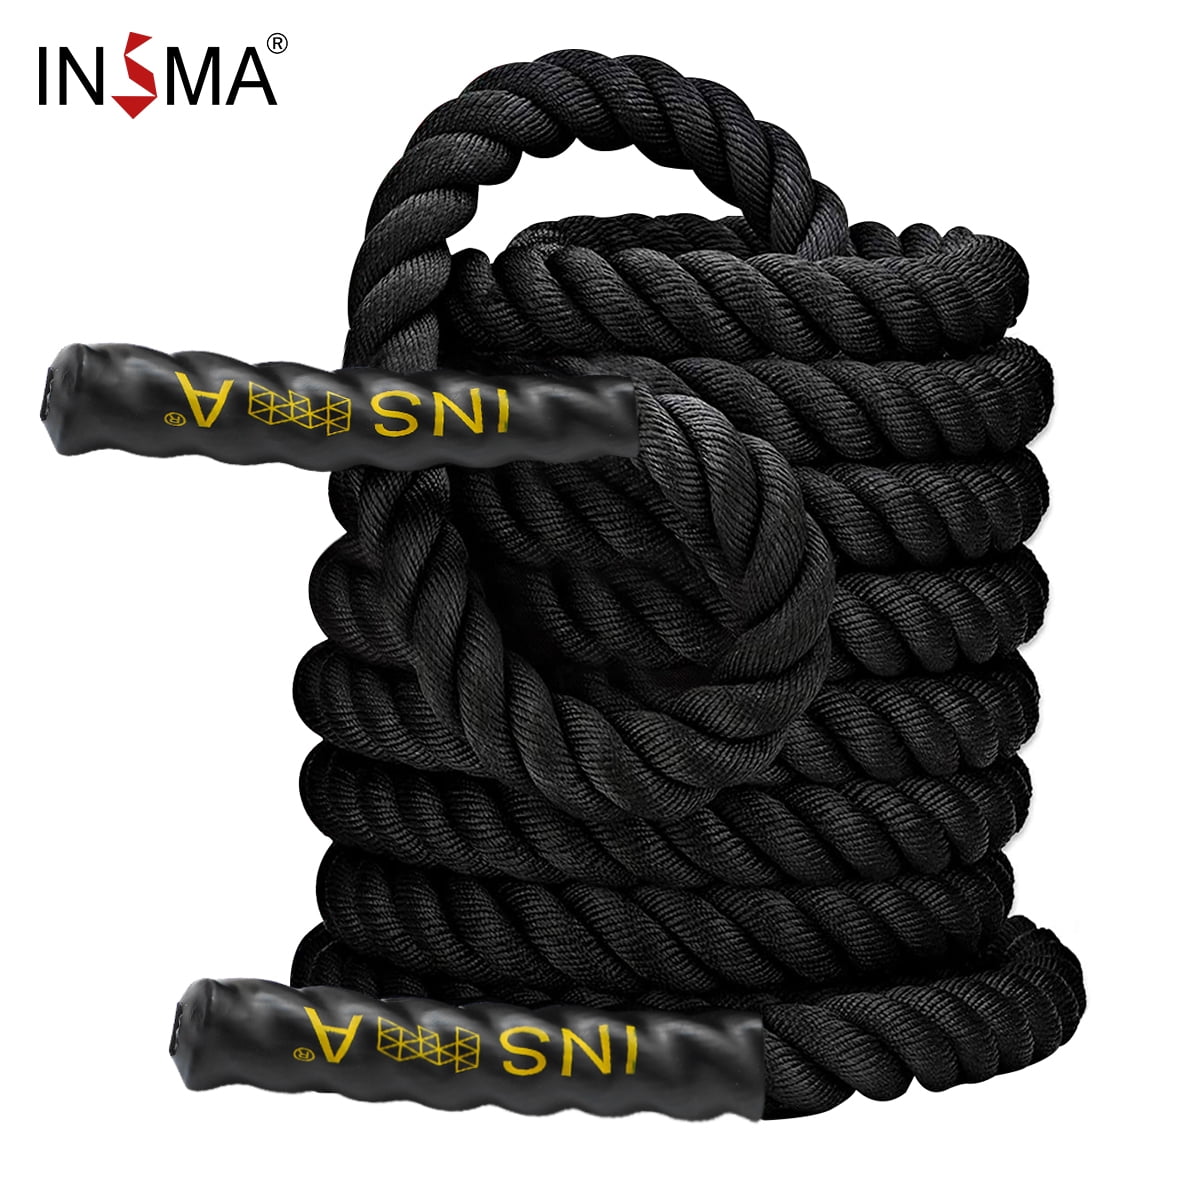 ND Battle Power Rope 5mtre Battling Sport Bootcamp Gym Exercise Fitness Training 